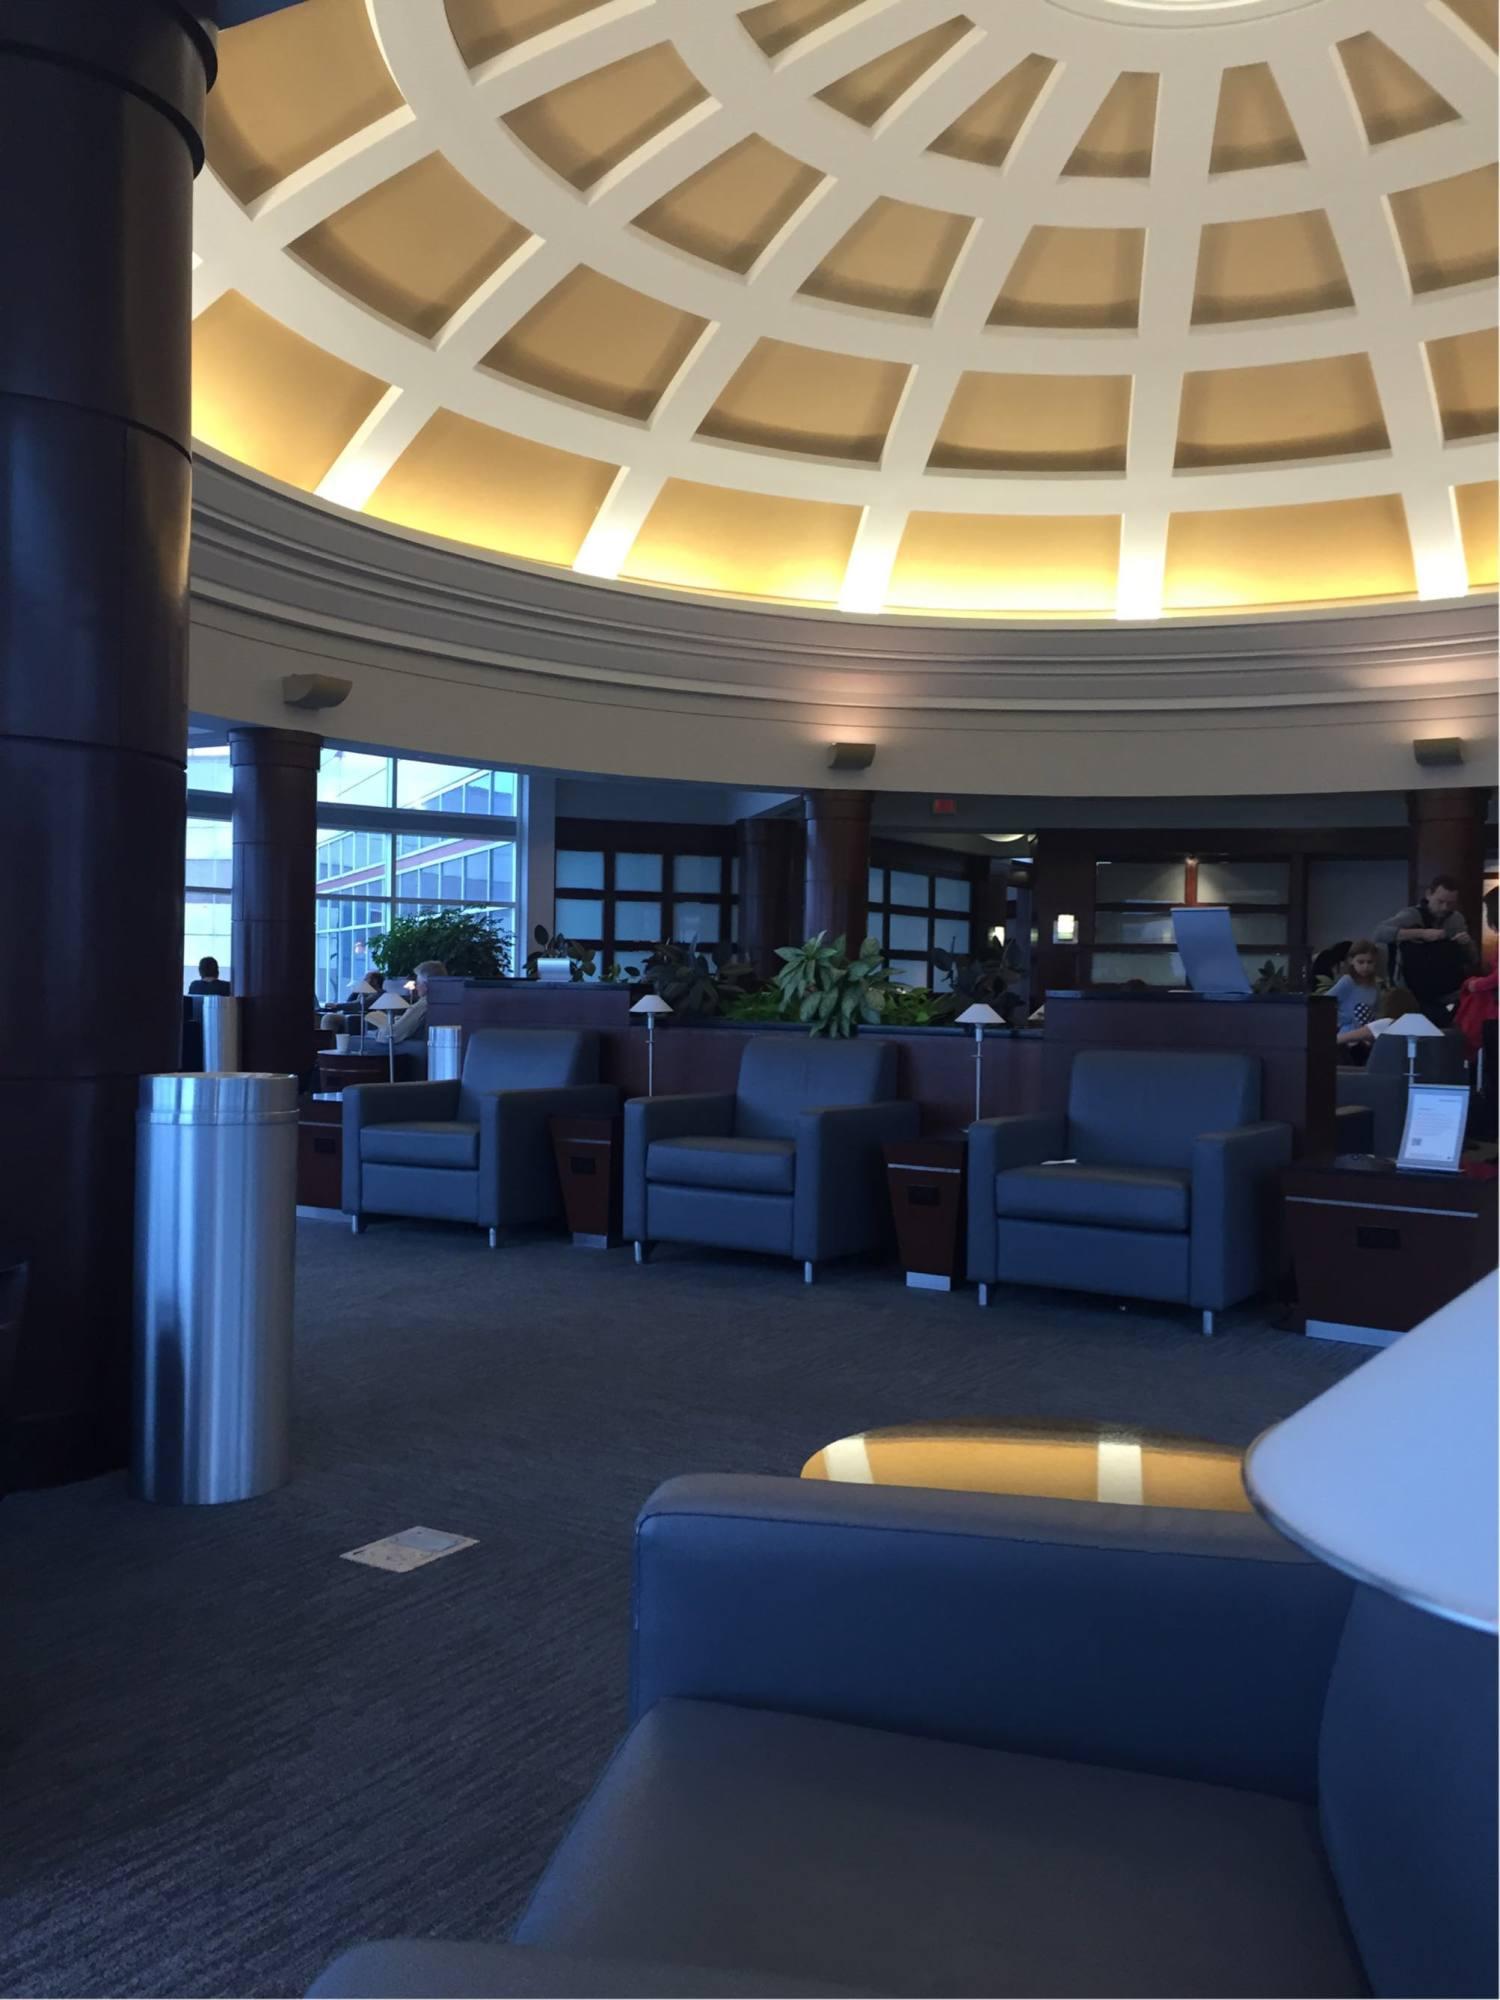 American Airlines Admirals Club image 13 of 37